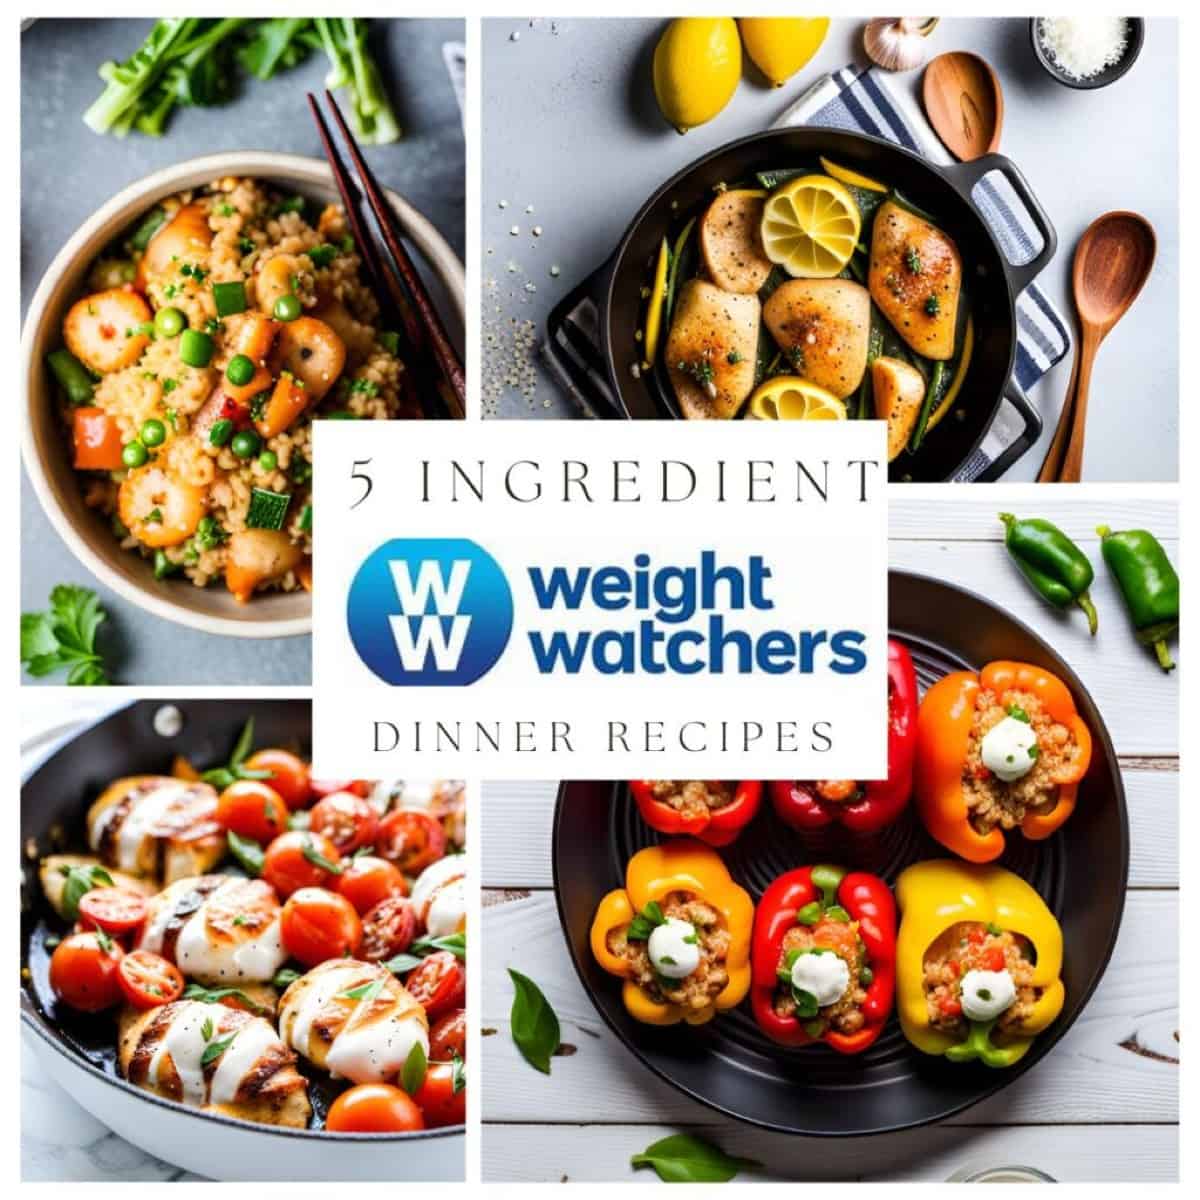 A collage image of five different Weight Watcher dinner recipes. The recipes include:

Sheet Pan Chicken Fajitas: Grilled chicken breasts, bell peppers, and onions on a sheet pan.
Shrimp Scampi: Shrimp, garlic, and white wine in a buttery sauce over pasta.
Salmon with Roasted Vegetables: Salmon fillet roasted with vegetables such as broccoli, Brussels sprouts, or sweet potatoes.
Slow Cooker Lentil Soup: A hearty and flavorful soup made with lentils, vegetables, and spices.
Turkey Burgers with Sweet Potato Fries: Turkey burgers topped with your favorite toppings and served with sweet potato fries.
All of the recipes are healthy and low in calories, making them perfect for Weight Watchers followers. The collage image is colorful and visually appealing, and it makes you want to try all of the recipes!